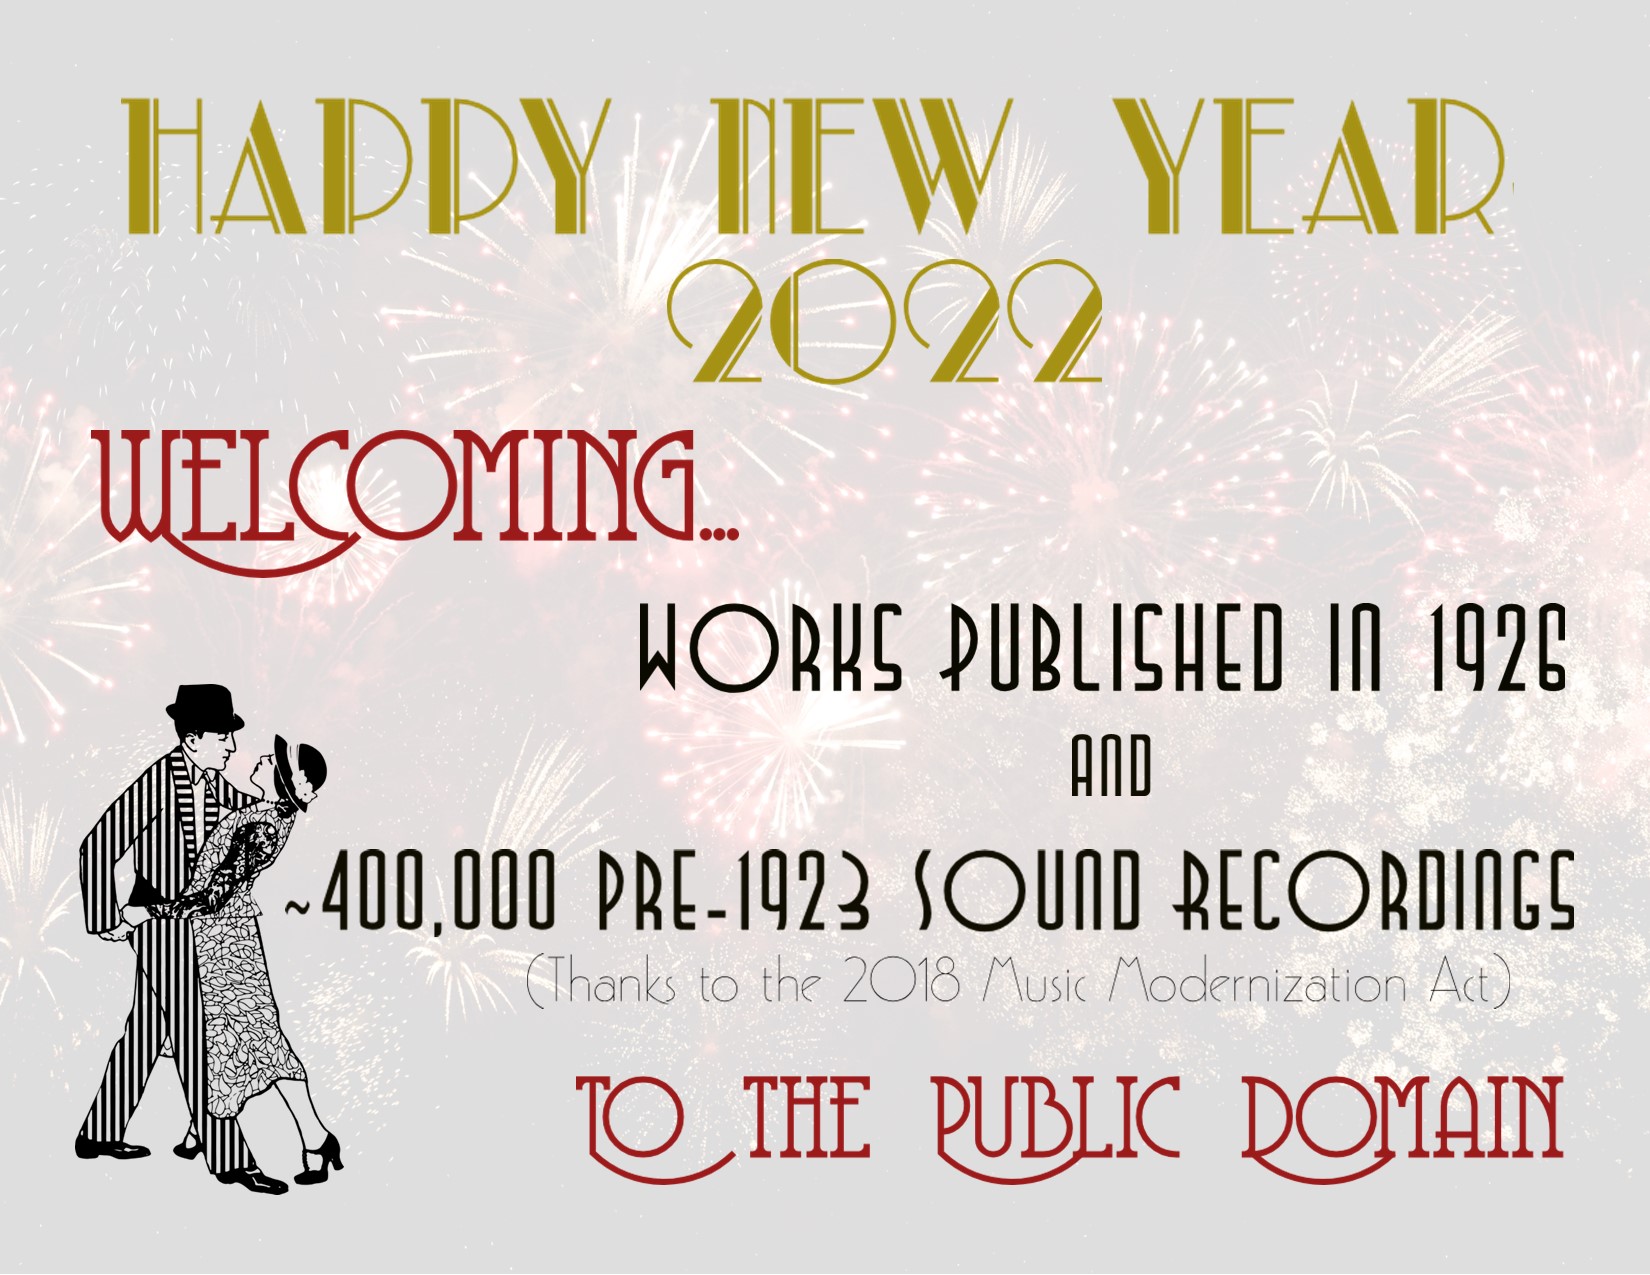 New Year 2022 celebration featuring information about content entering the public domain in 2022. Background image of fireworks and a flapper couple dancing is in the left corner. 